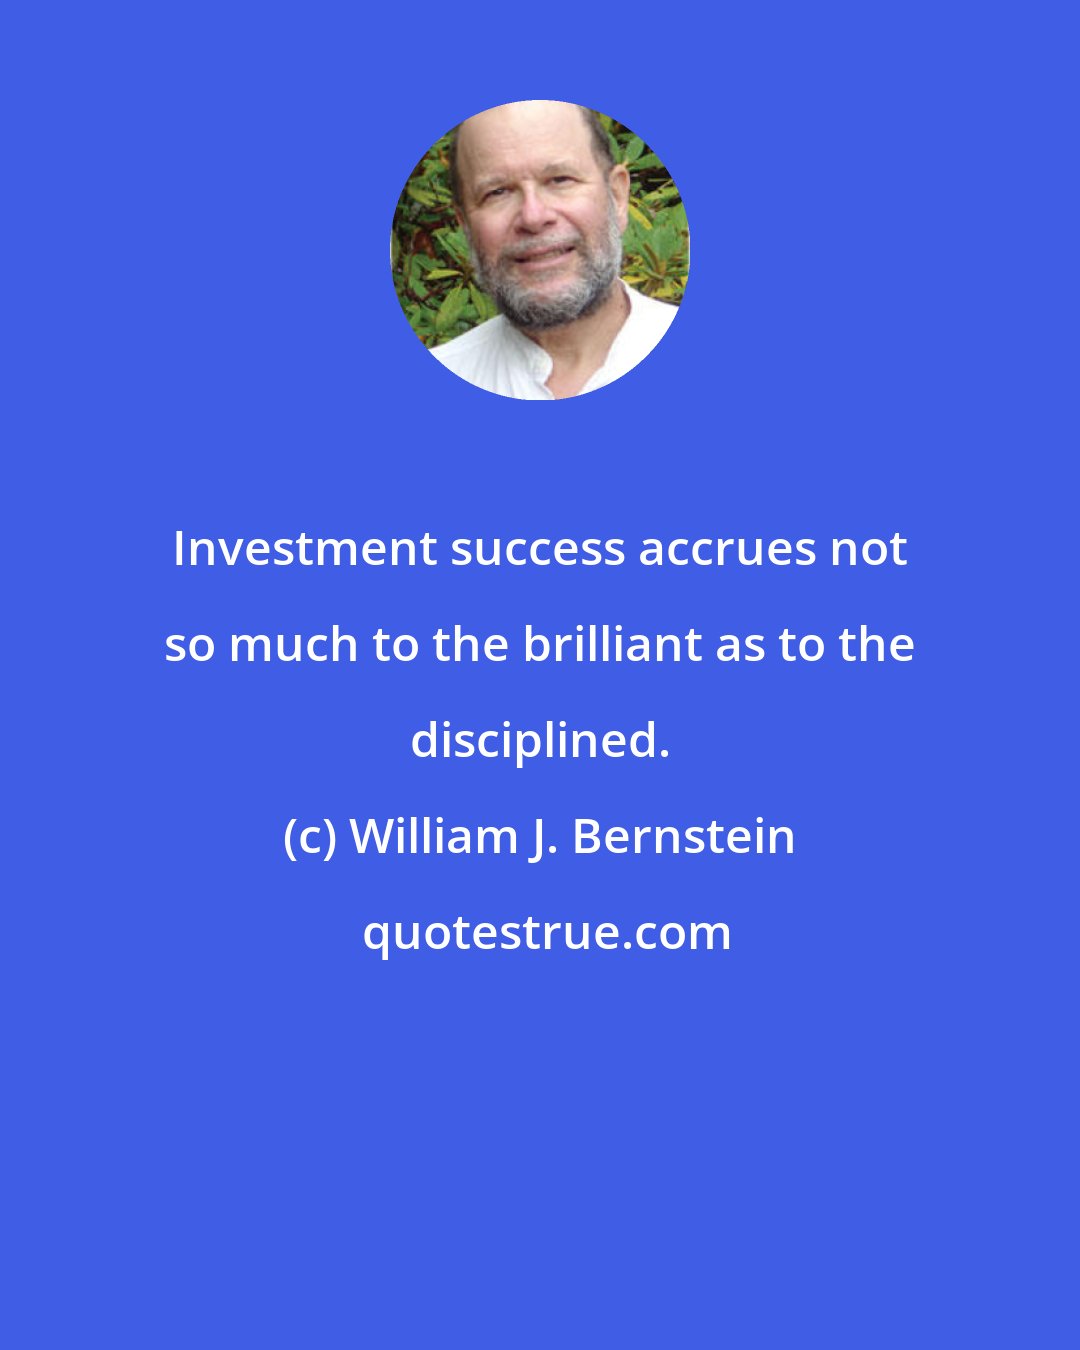 William J. Bernstein: Investment success accrues not so much to the brilliant as to the disciplined.